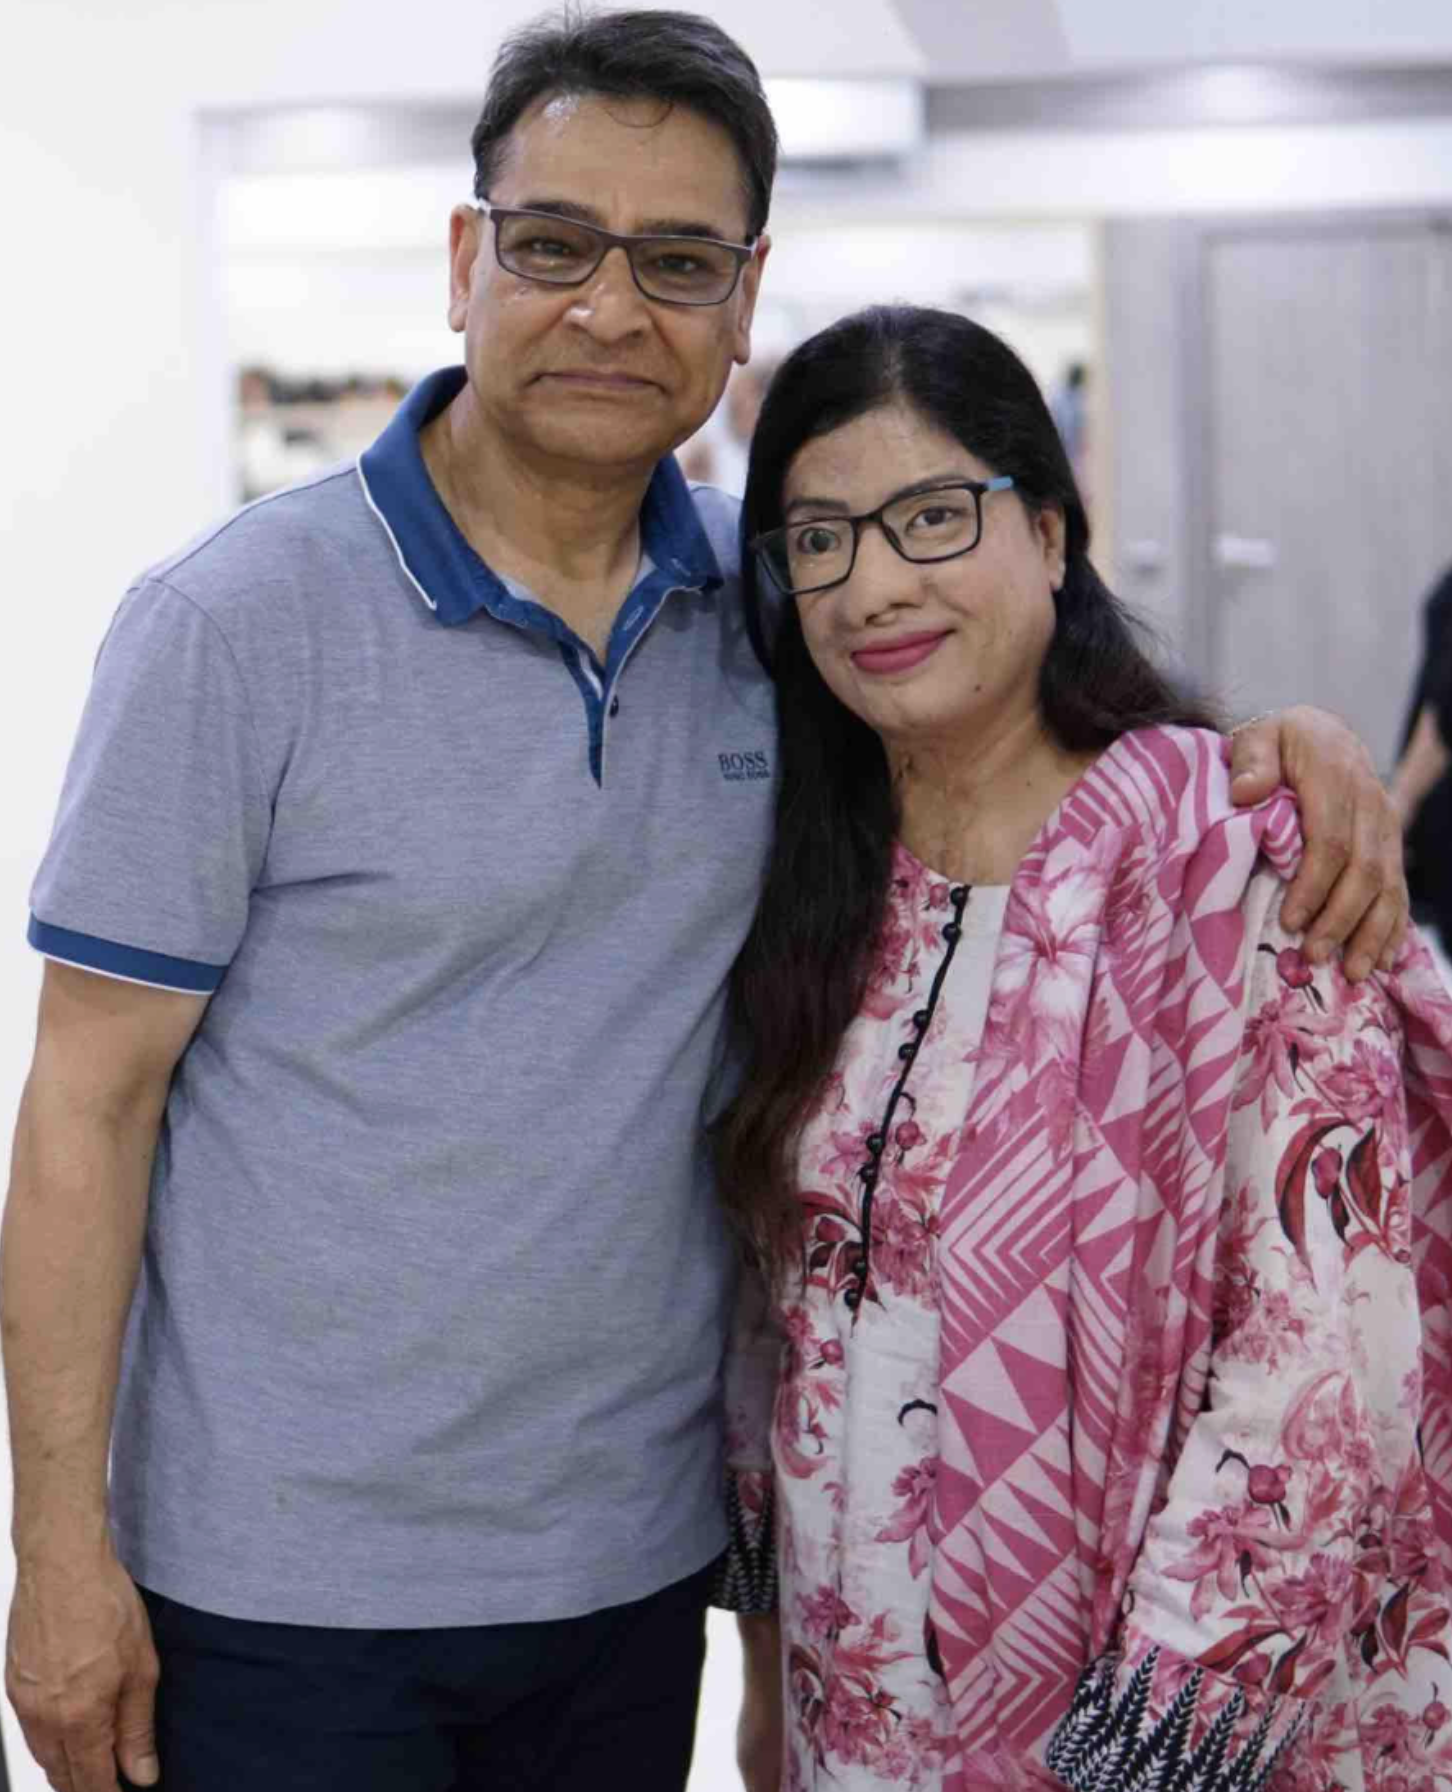 Thumbnail for post: Crown Clinic’s Dr Asim Shahmalak reunited with woman attacked by acid whose faces he helped to rebuild